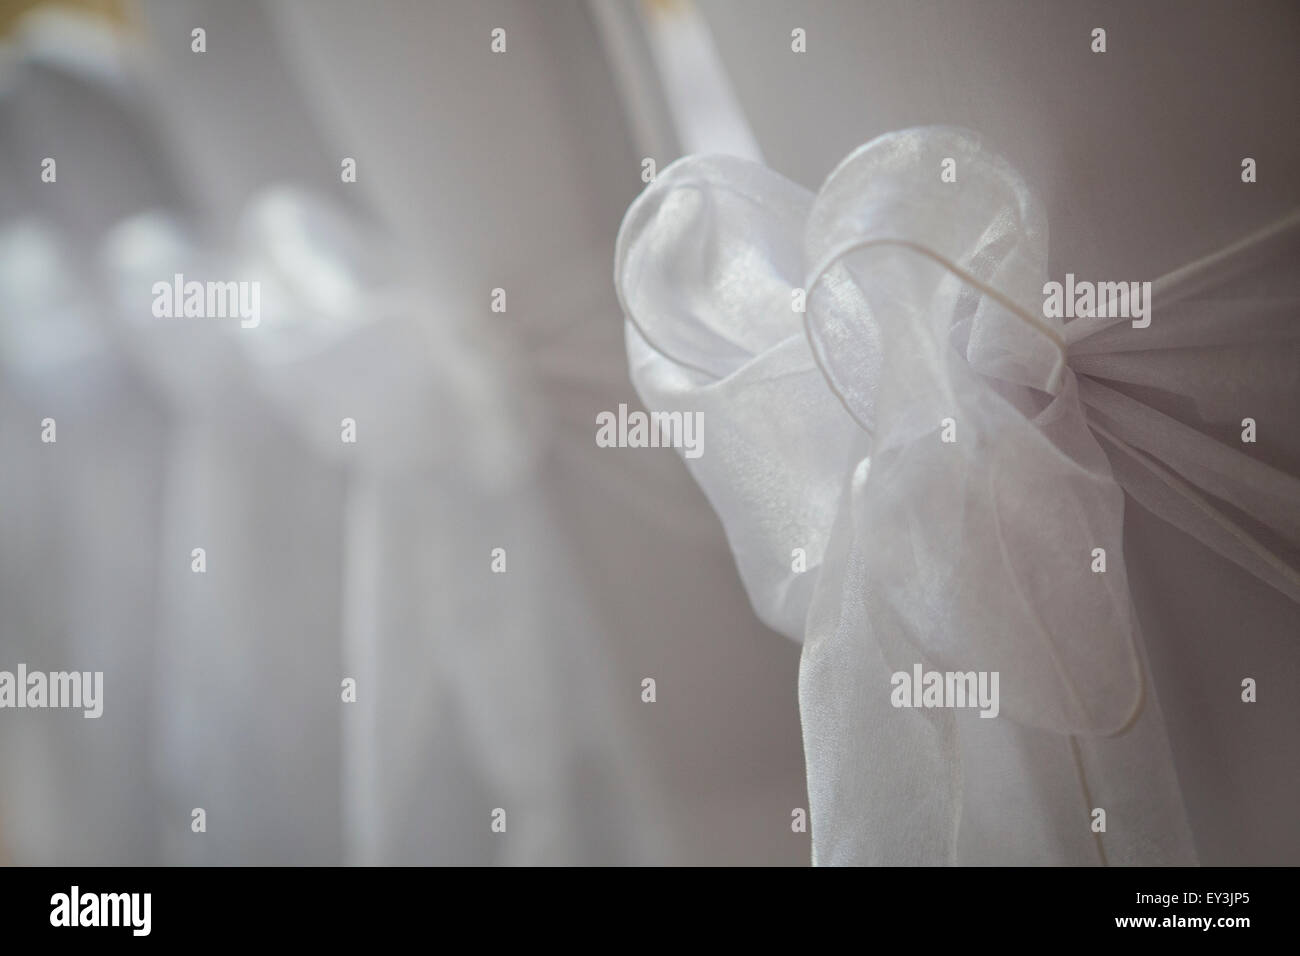 White satin bow tied on a chair. Stock Photo